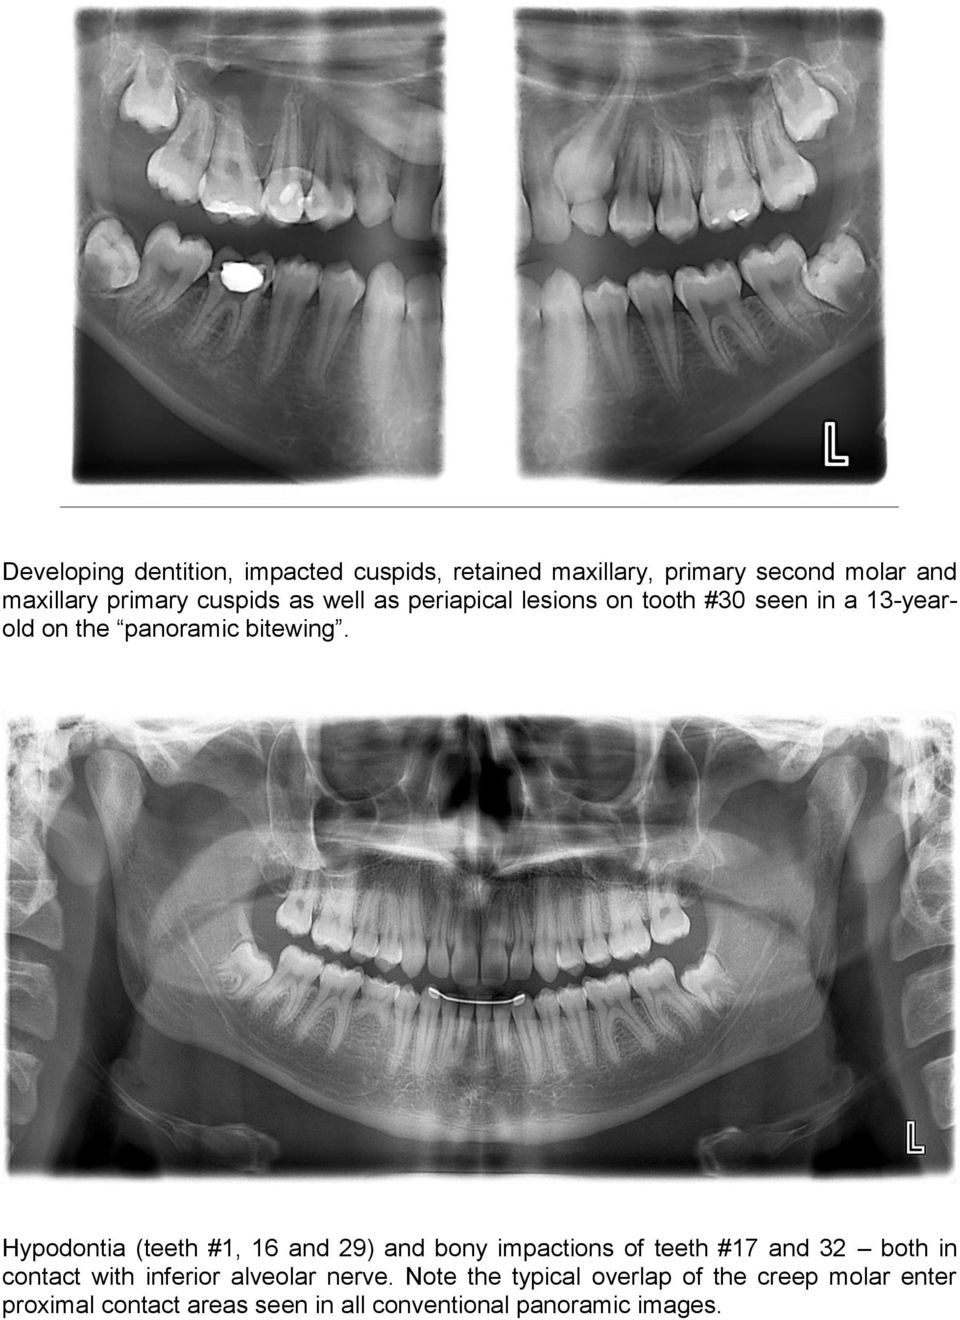 Hypodontia (teeth #1, 16 and 29) and bony impactions of teeth #17 and 32 both in contact with inferior